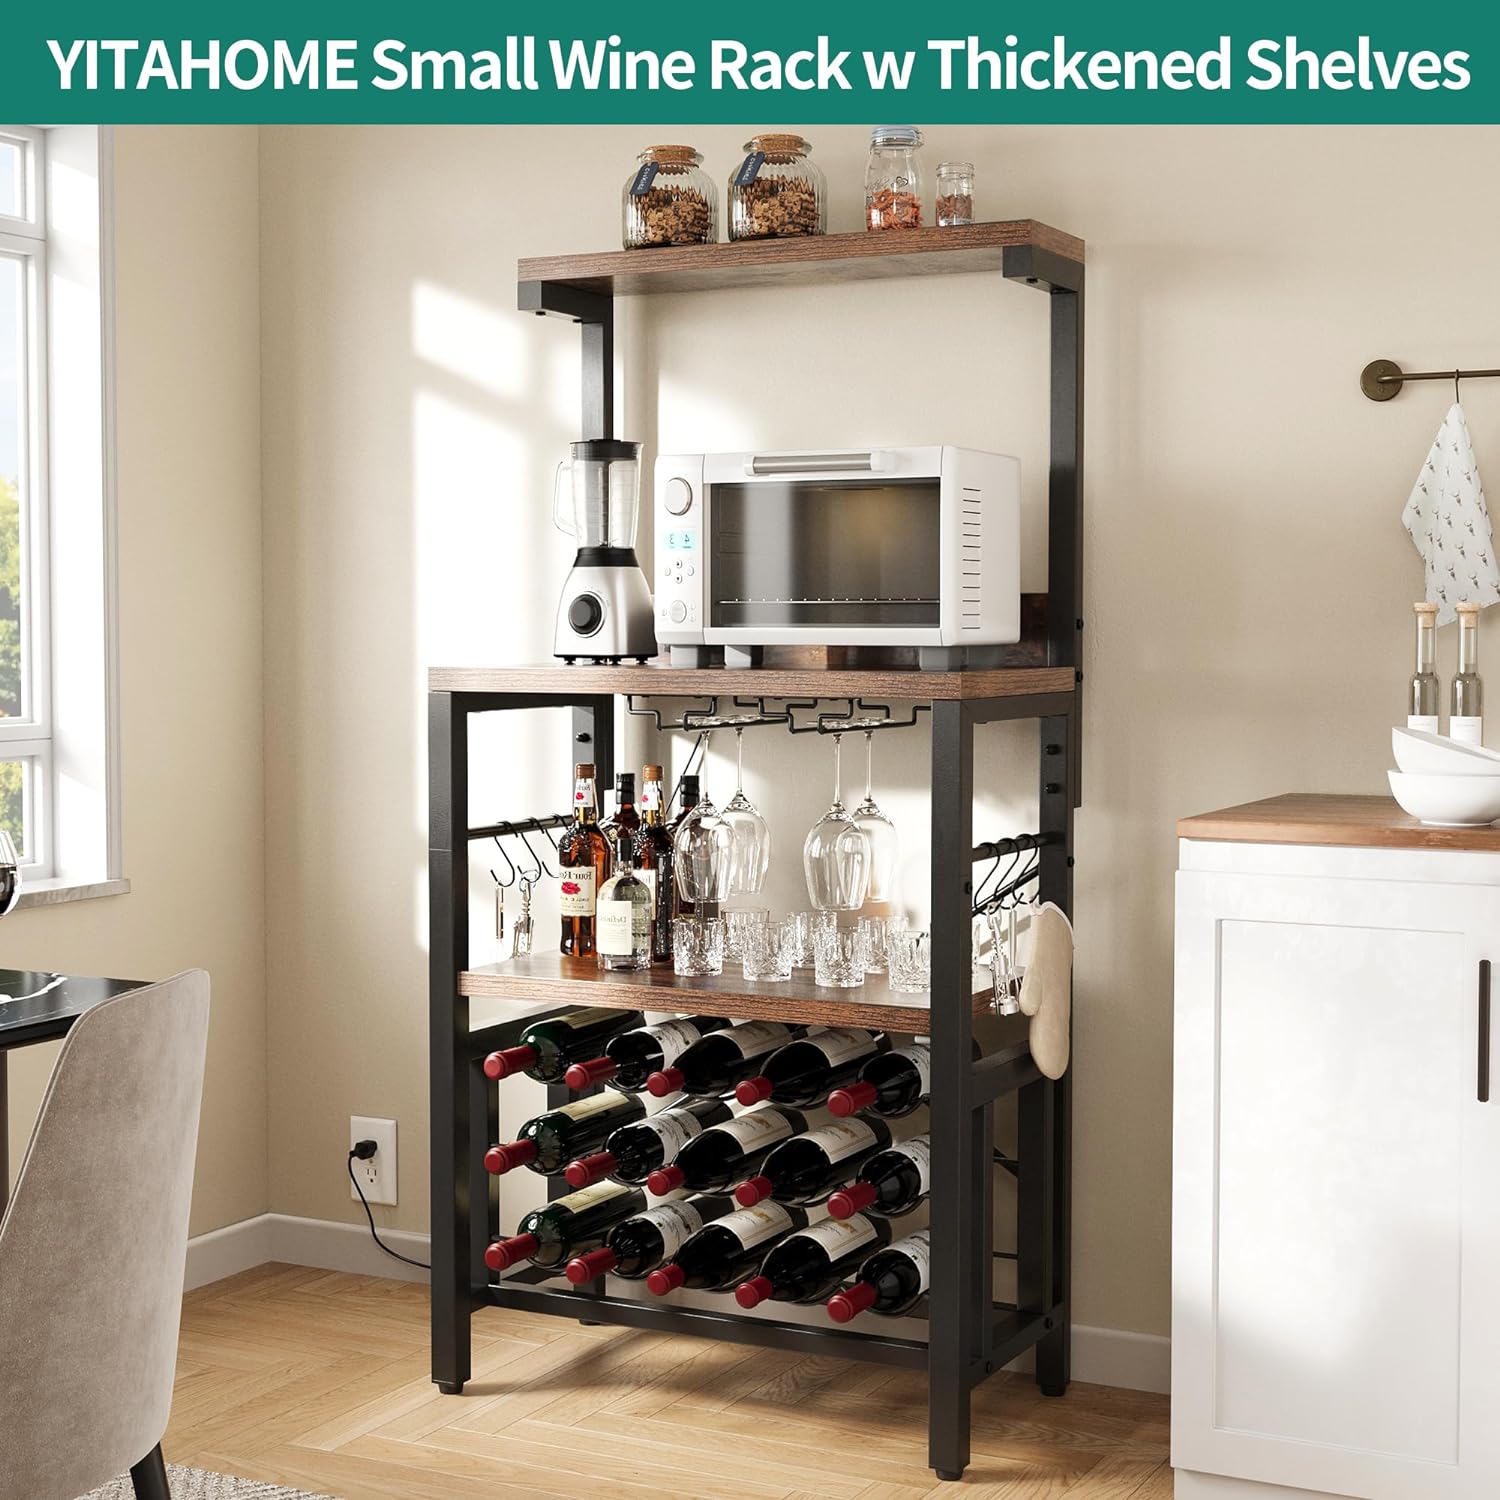 YITAHOME Small Kitchen Microwave Bakers Stand Wine Rack, Wine Rack Freestanding Floor, Coffee Bar Storage with Power Outlet for Liquor Thicken Shelf Farmhouse Dining Room, Rustic Brown